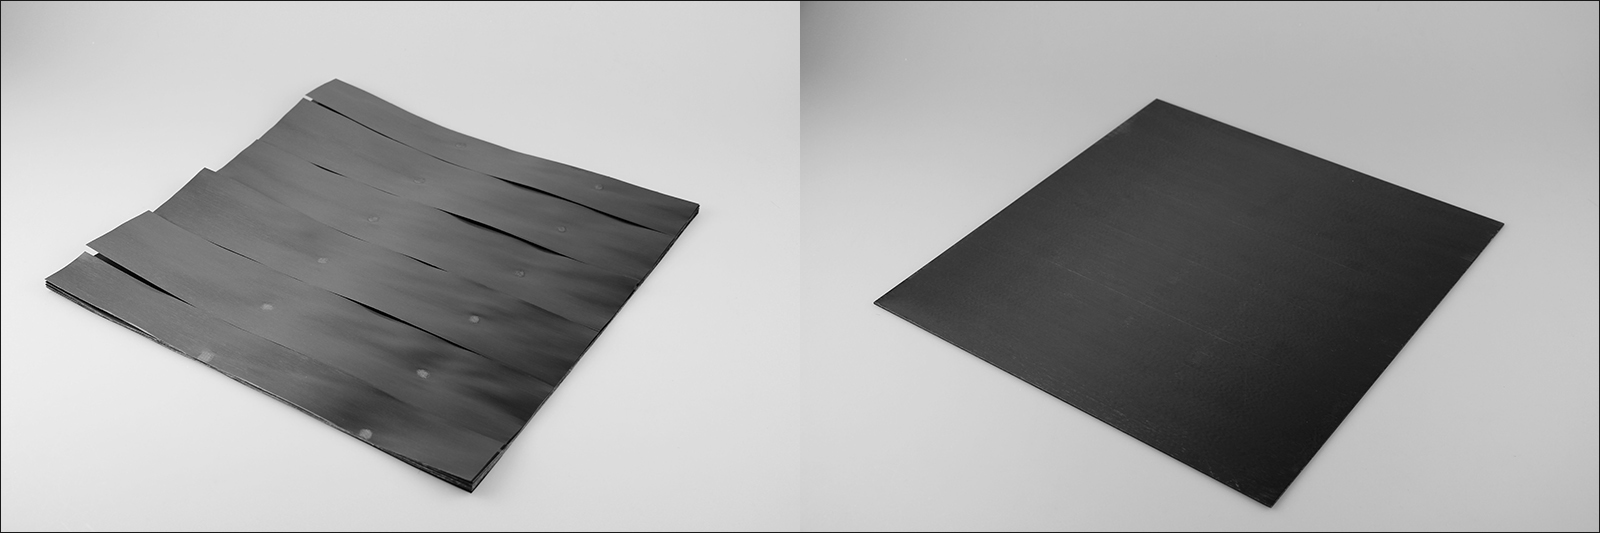 Carbon fibers and heated plastic combine under pressure to form a homogeneous CFRP plate. With infrared radiation in a vacuum, this occurs quickly and with a high degree of energy efficiency.